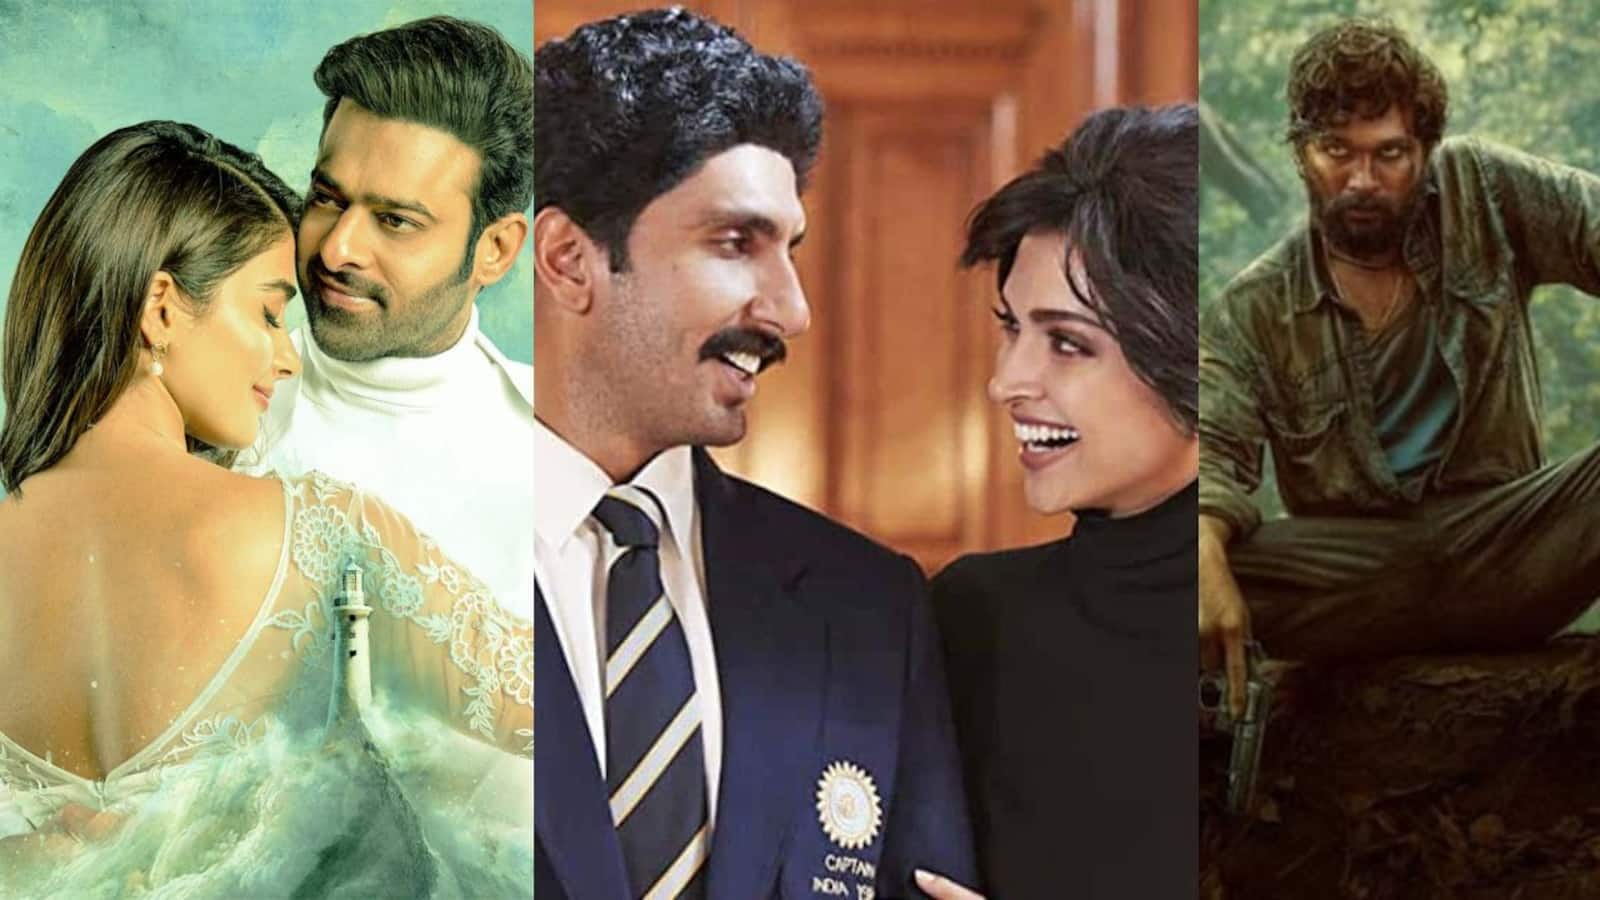 Trending OTT News Today: Ranveer Singh’s 83 and Allu Arjun starrer Pushpa may soon be available on streaming platforms, Prabhas' Radhe Shyam offered Rs 350 crore and more